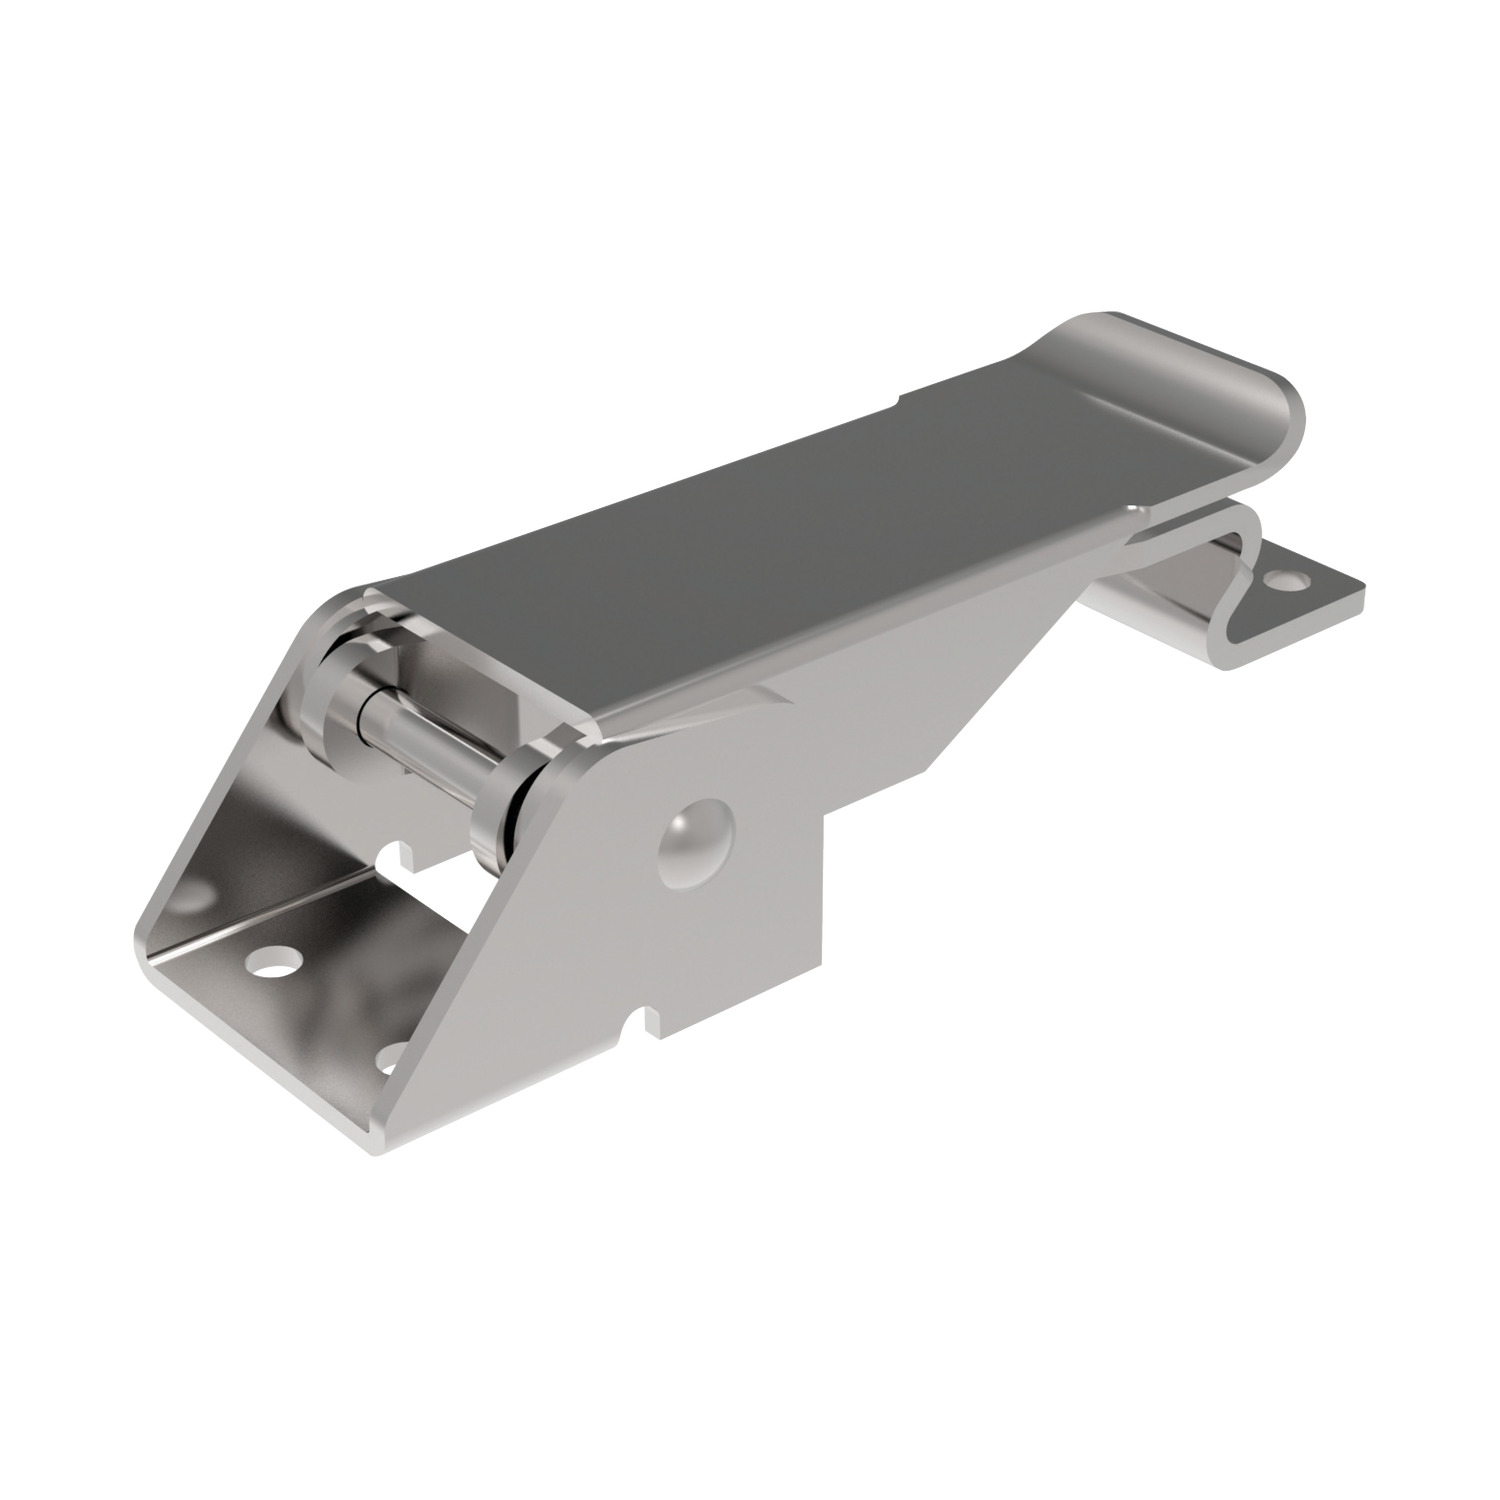 J0580.AC0001 Toggle Latches - Nickel plated steel. Nickel plated steel - 82 to 94 - 22 - 27